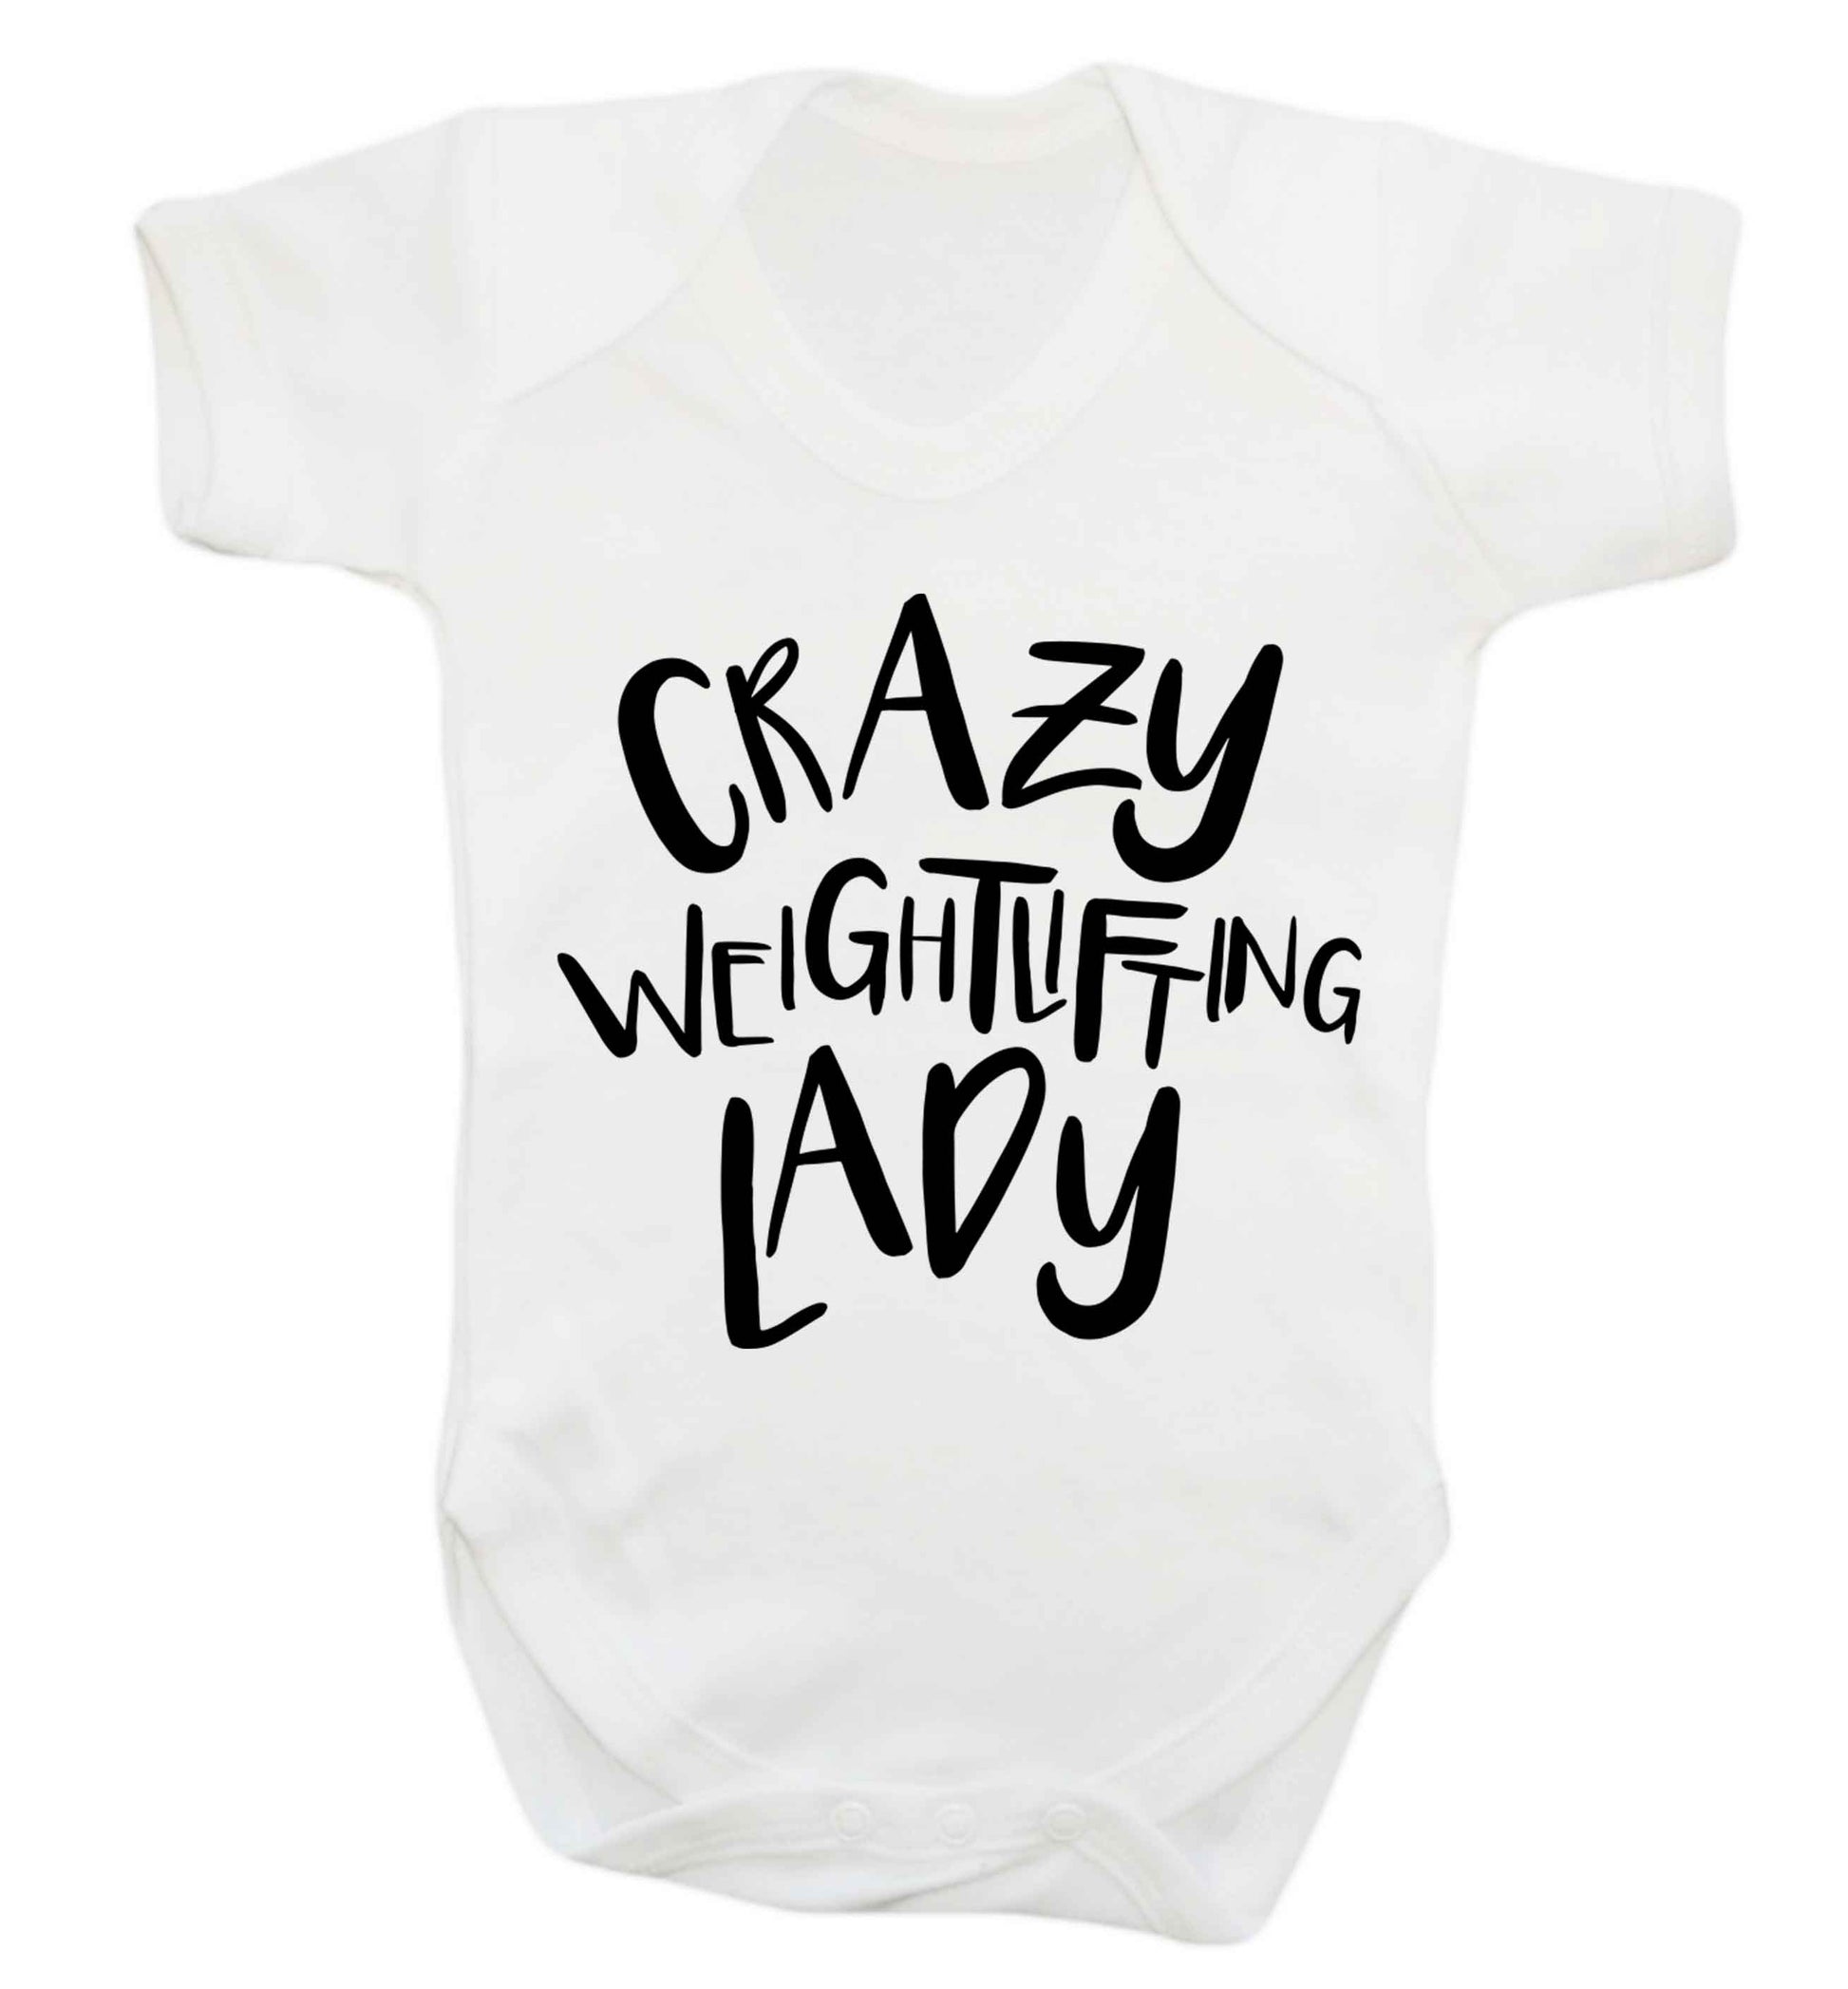 Crazy weightlifting lady Baby Vest white 18-24 months